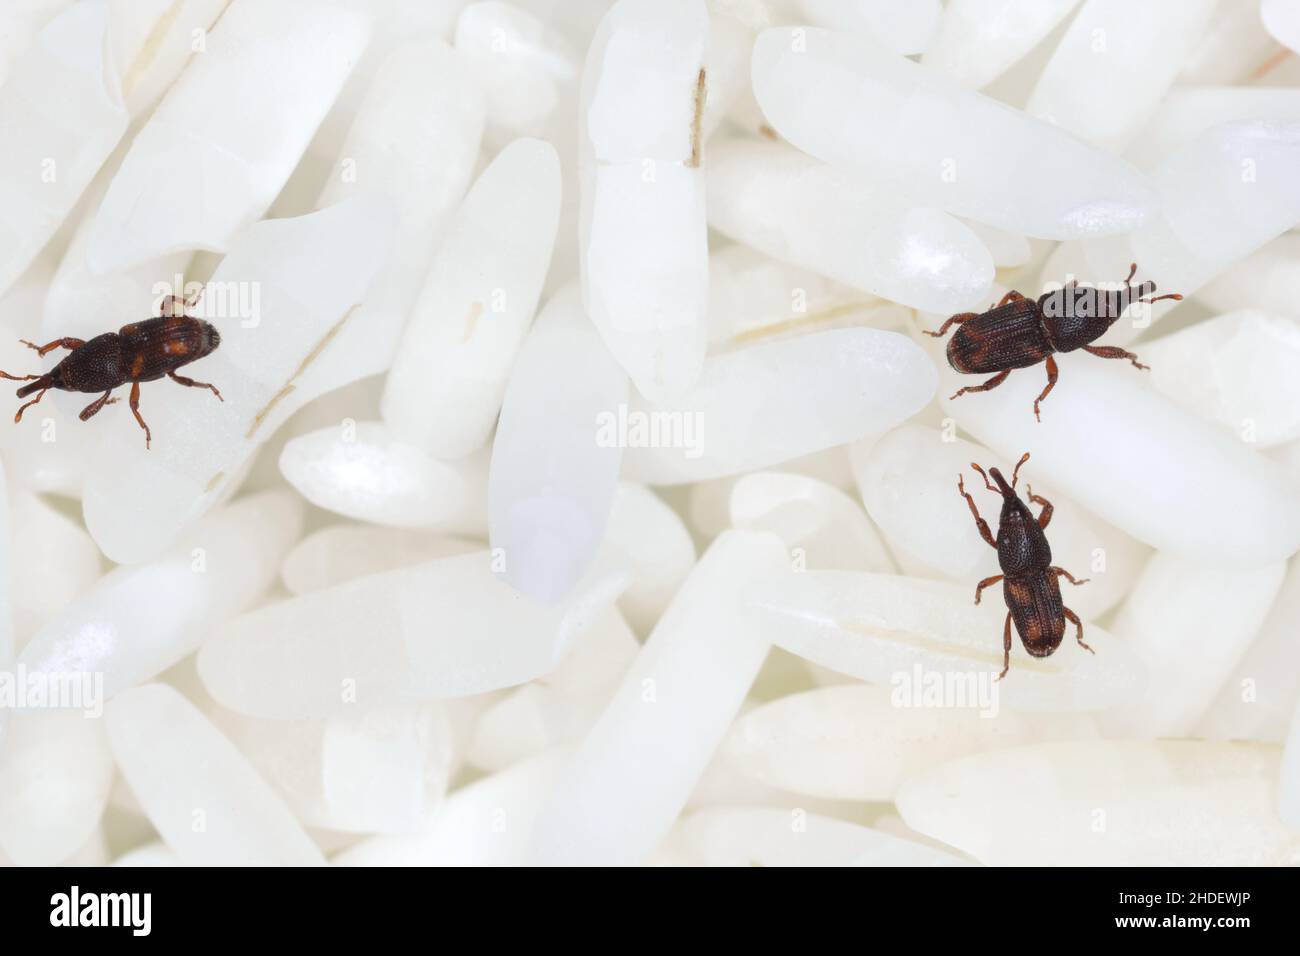 Close up of adults rice weevils (Sitophilus oryzae) on rice grains. Stock Photo